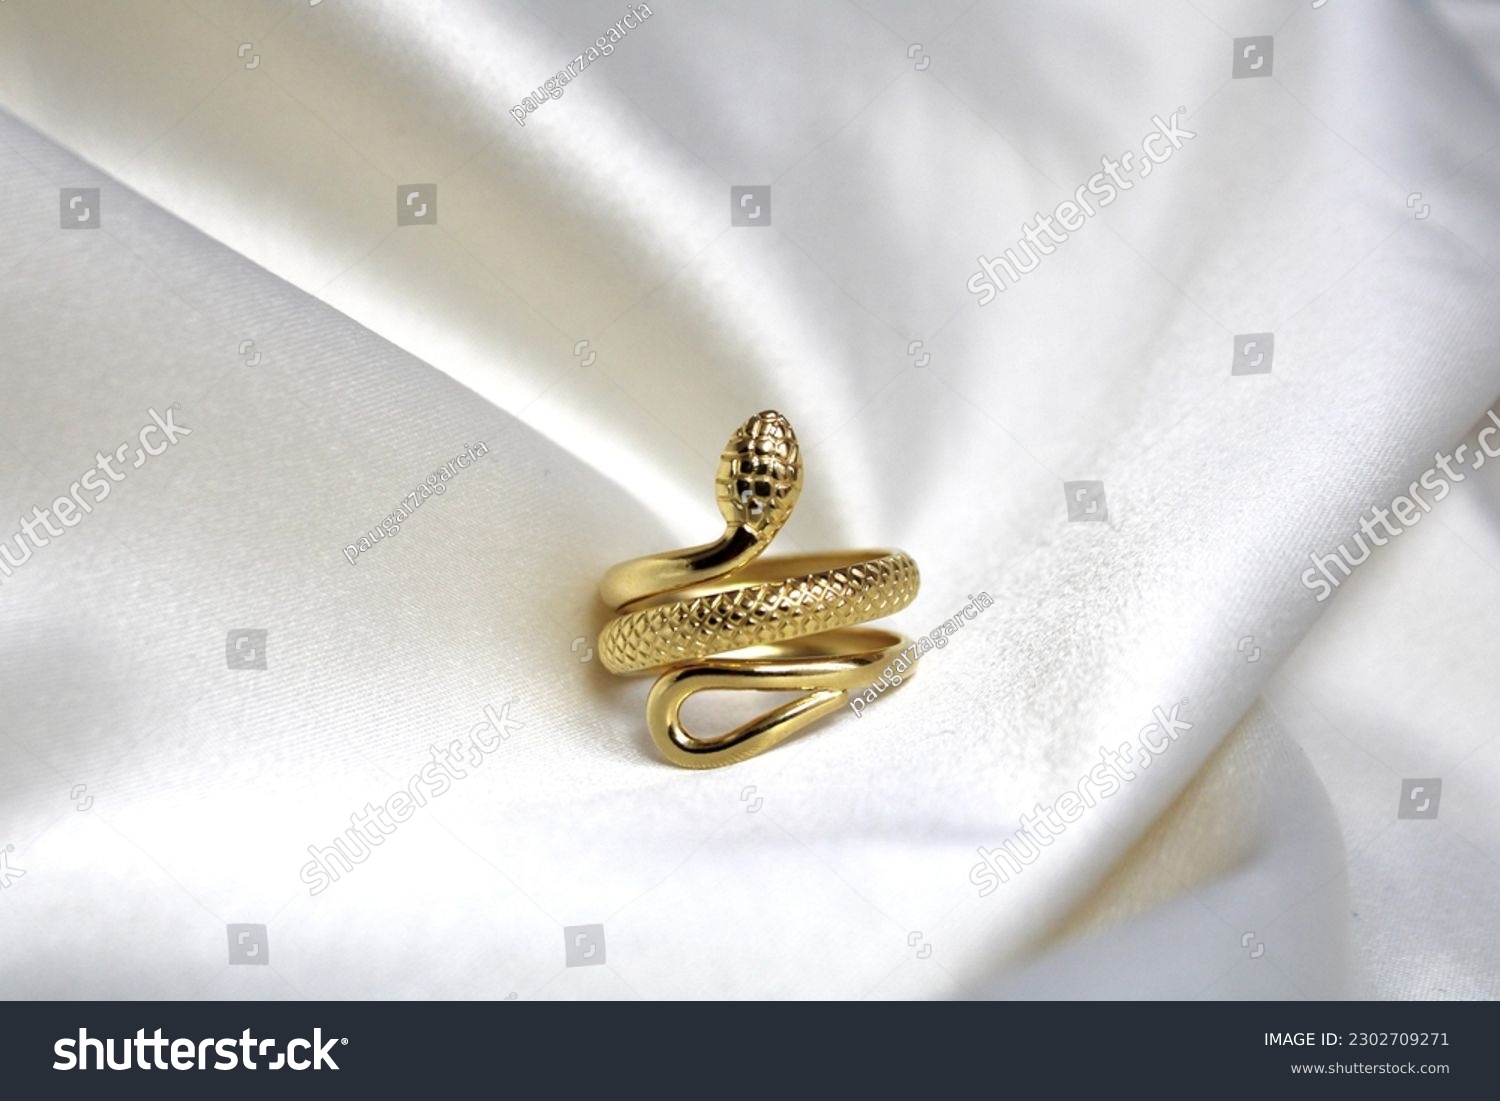 Cool golden snake ring with a white background #2302709271